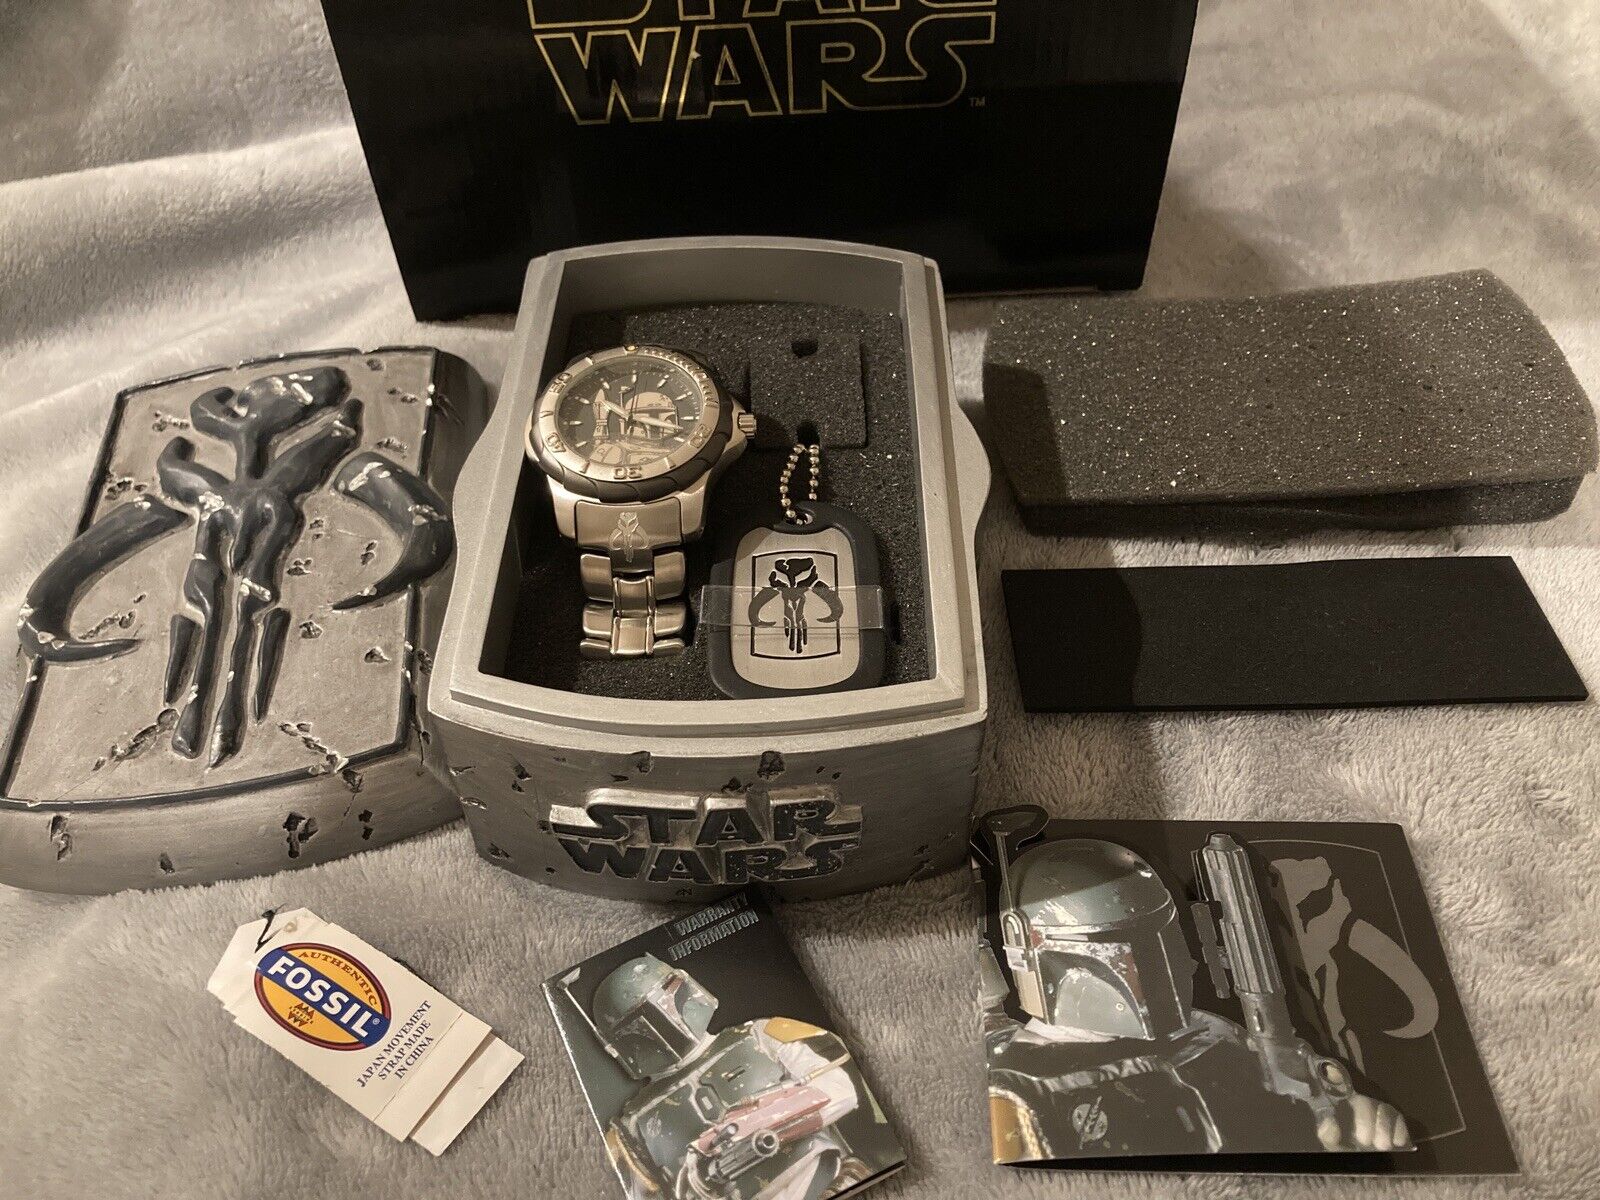 VERY RARE 2002 BEST Fossil Star Wars Watch, Limited Edition BOBA FETT 297/2000